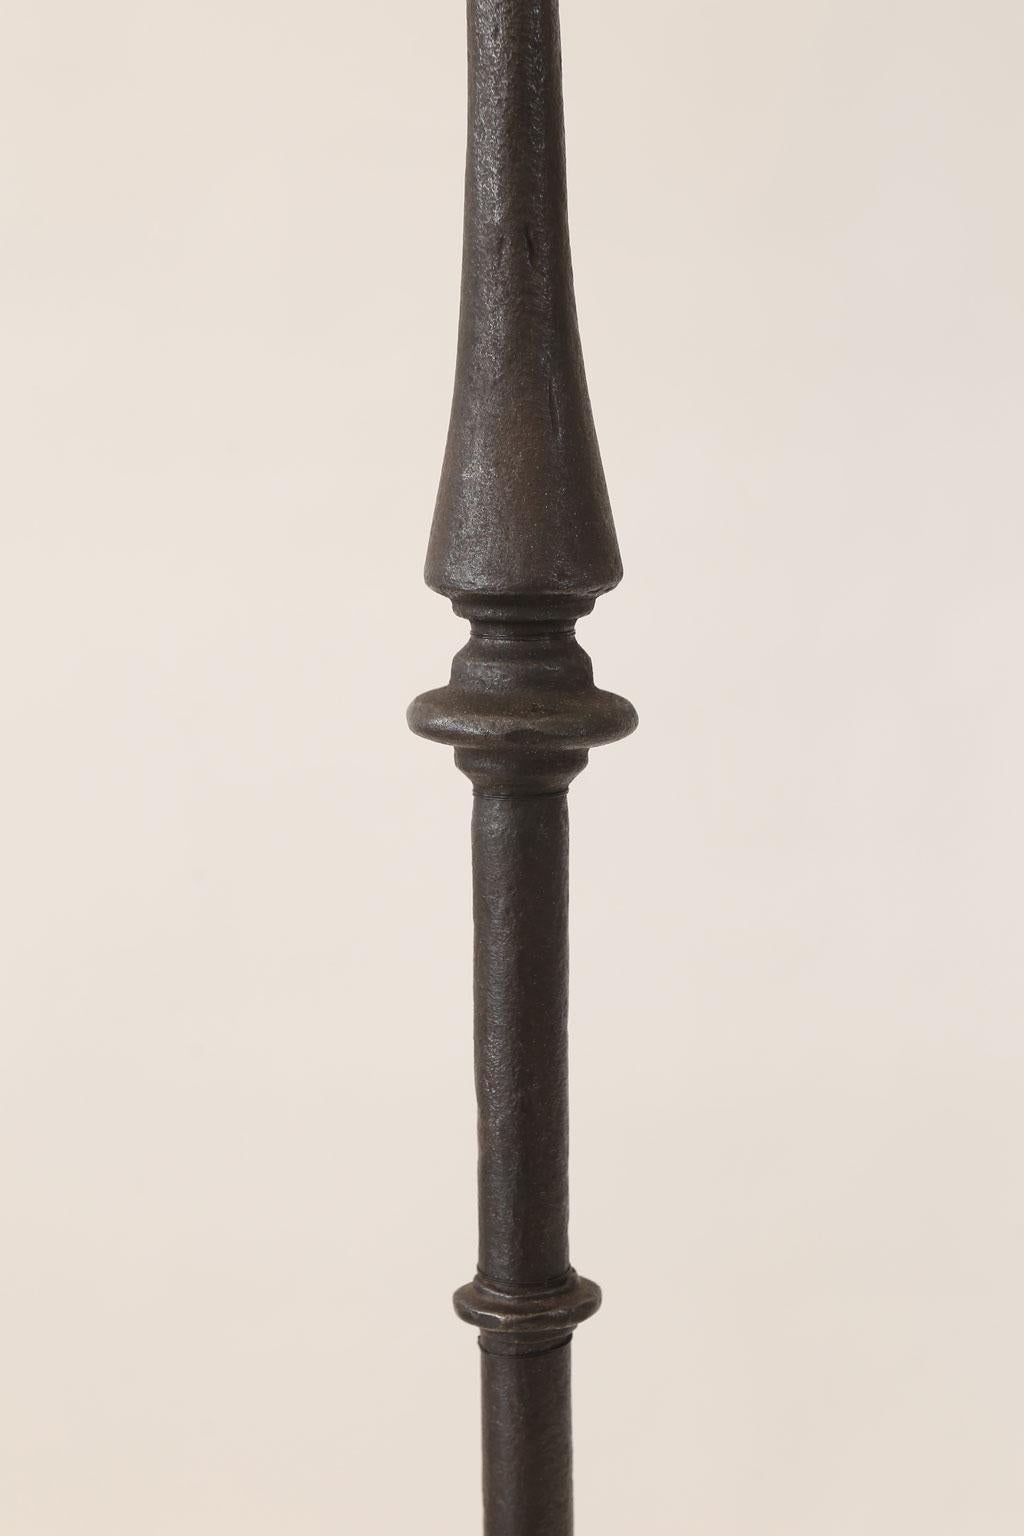 Two Iron Candle Stand Floor Lamps 2